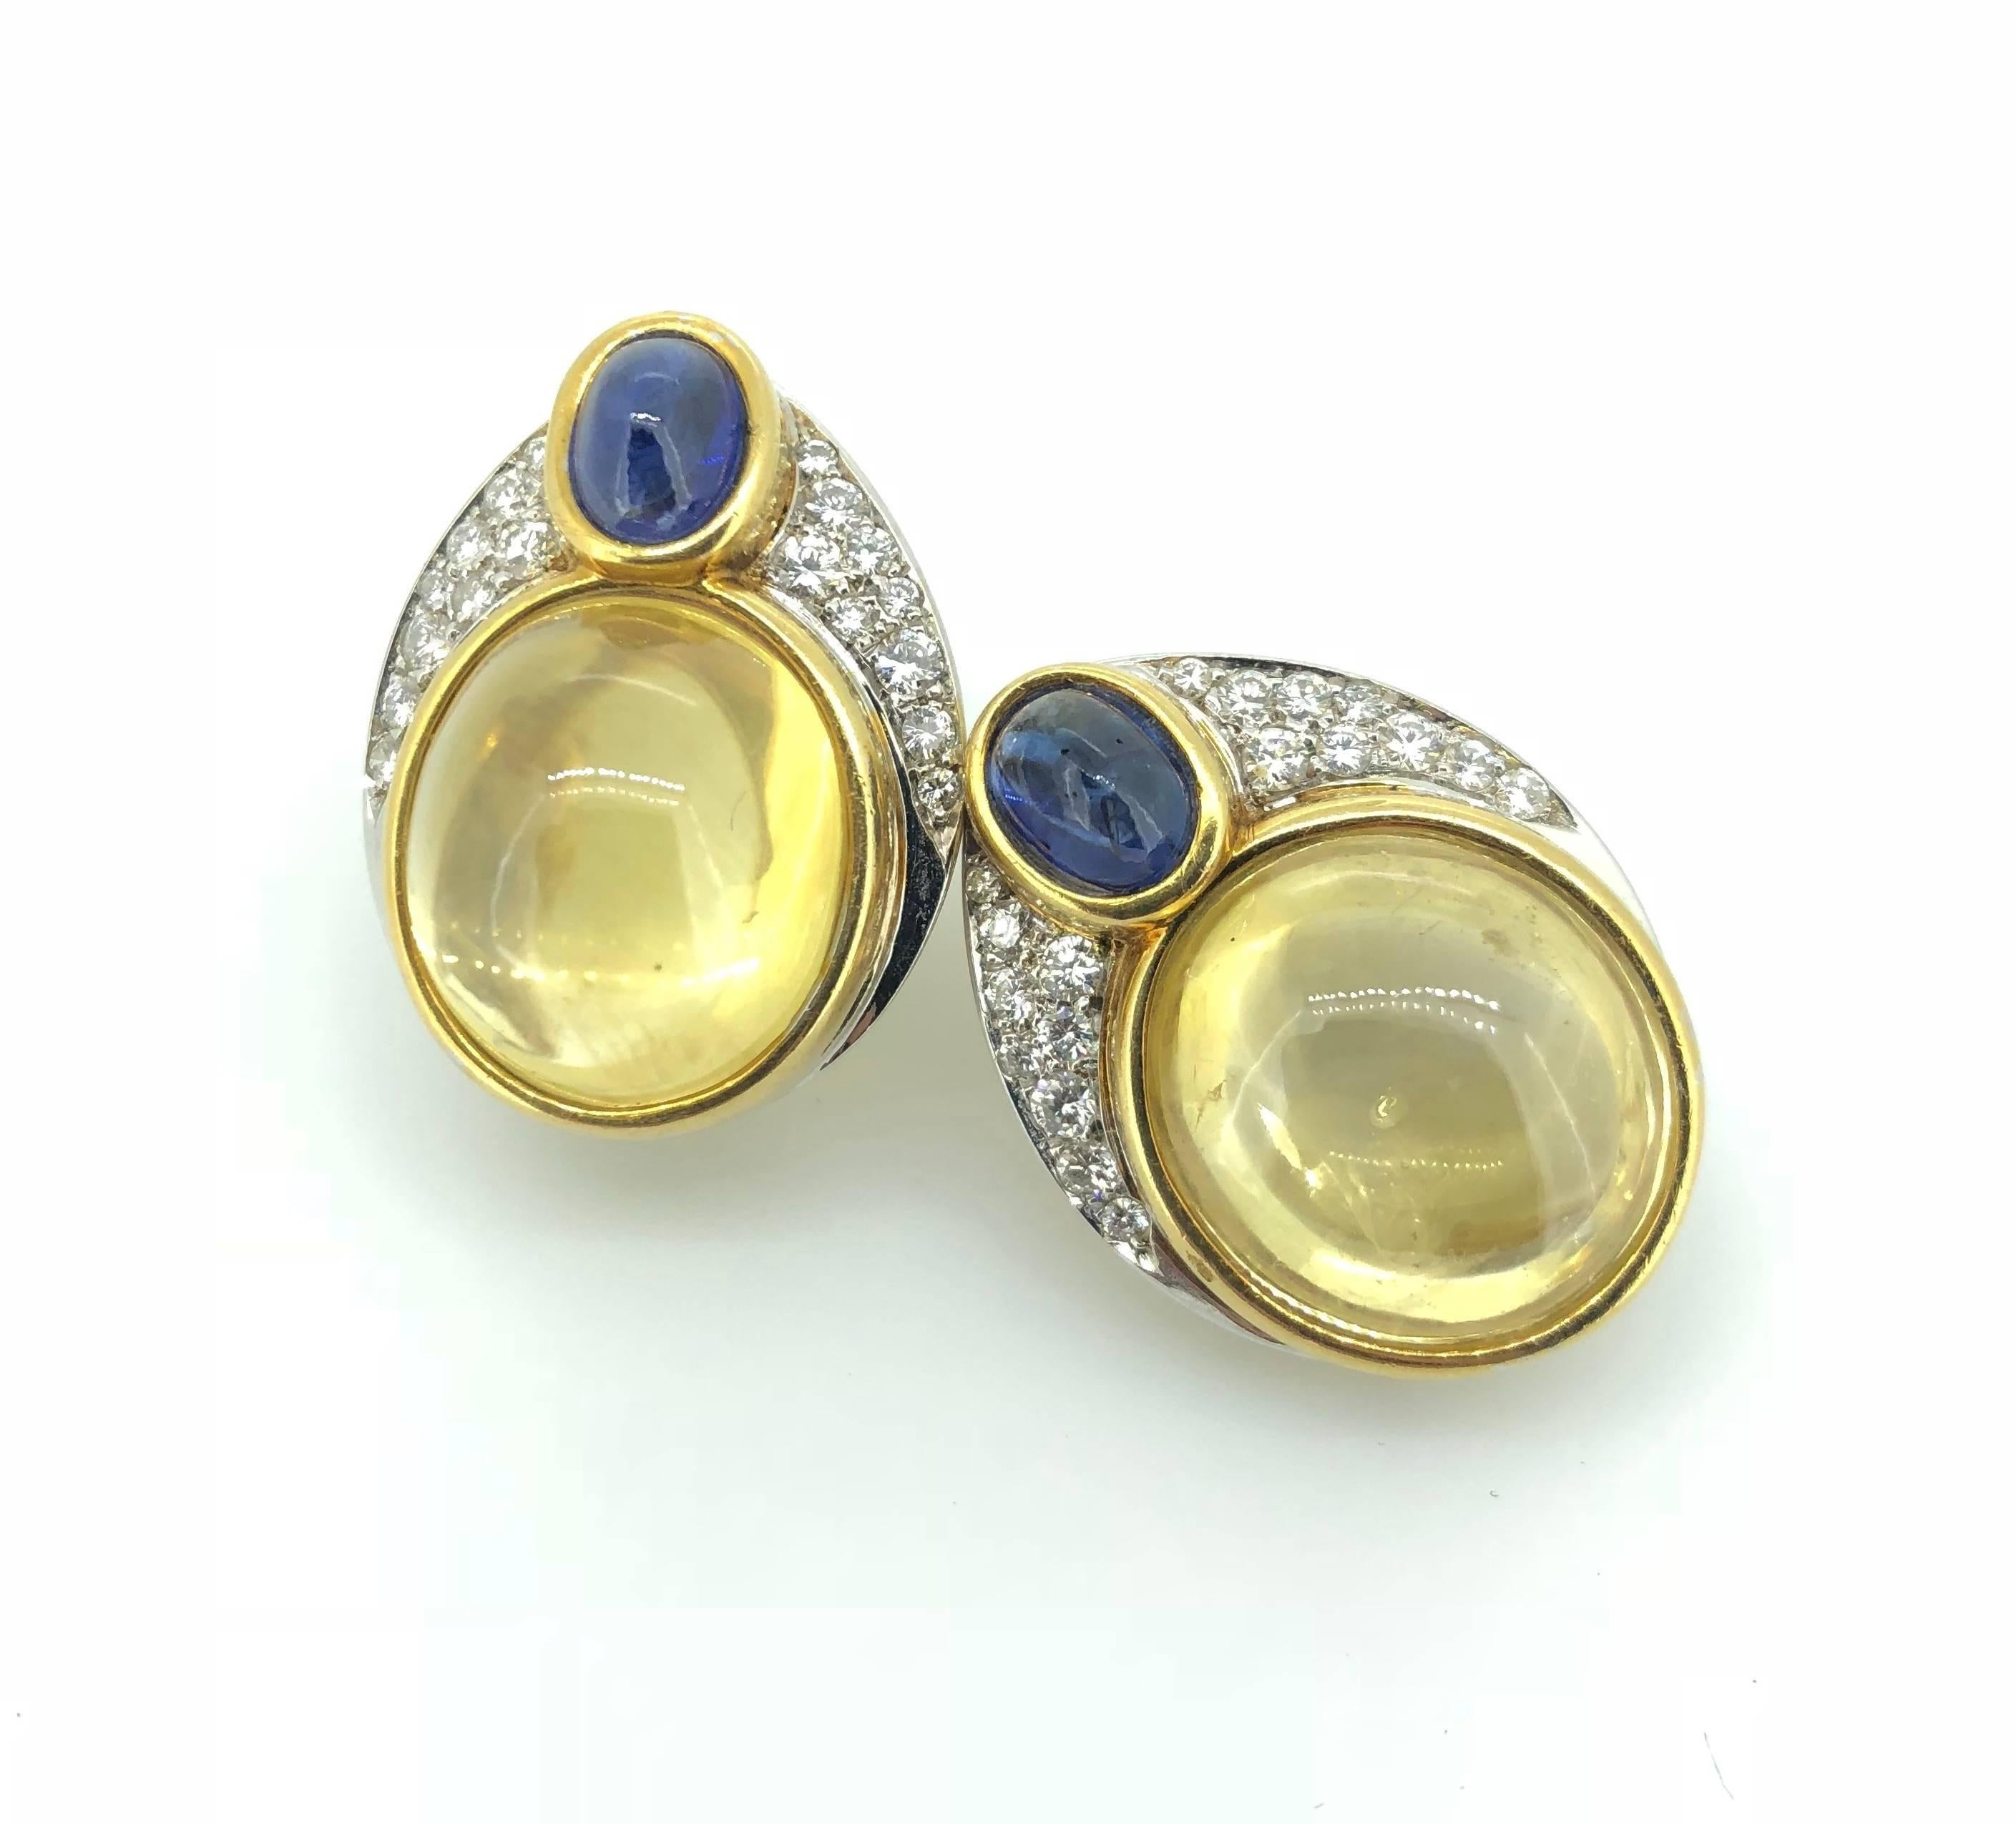 Retro Period 14 Karat Gold Yellow Sapphire Cabochon (Circa 45 Carats) Diamond And Blue Sapphire Cabochon Ear Clips. 

The Yellow Sapphire Cabochons enveloped by rub-over setting and accented with blue sapphire cabochon and round brilliant cut white